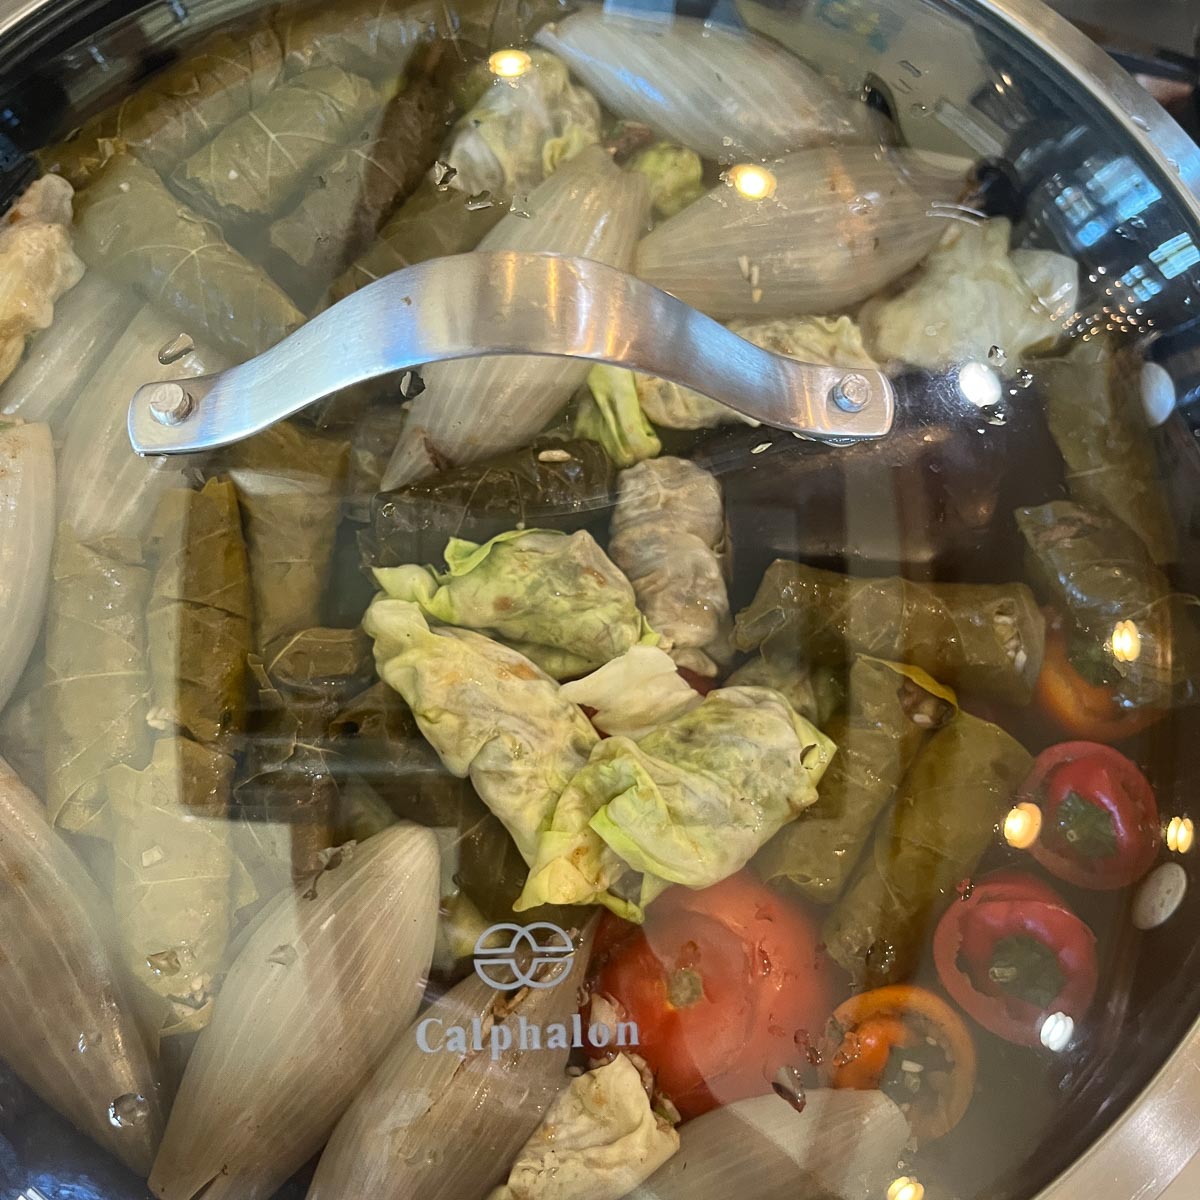 Iraqi Dolma covered with a see through lid, uncooked